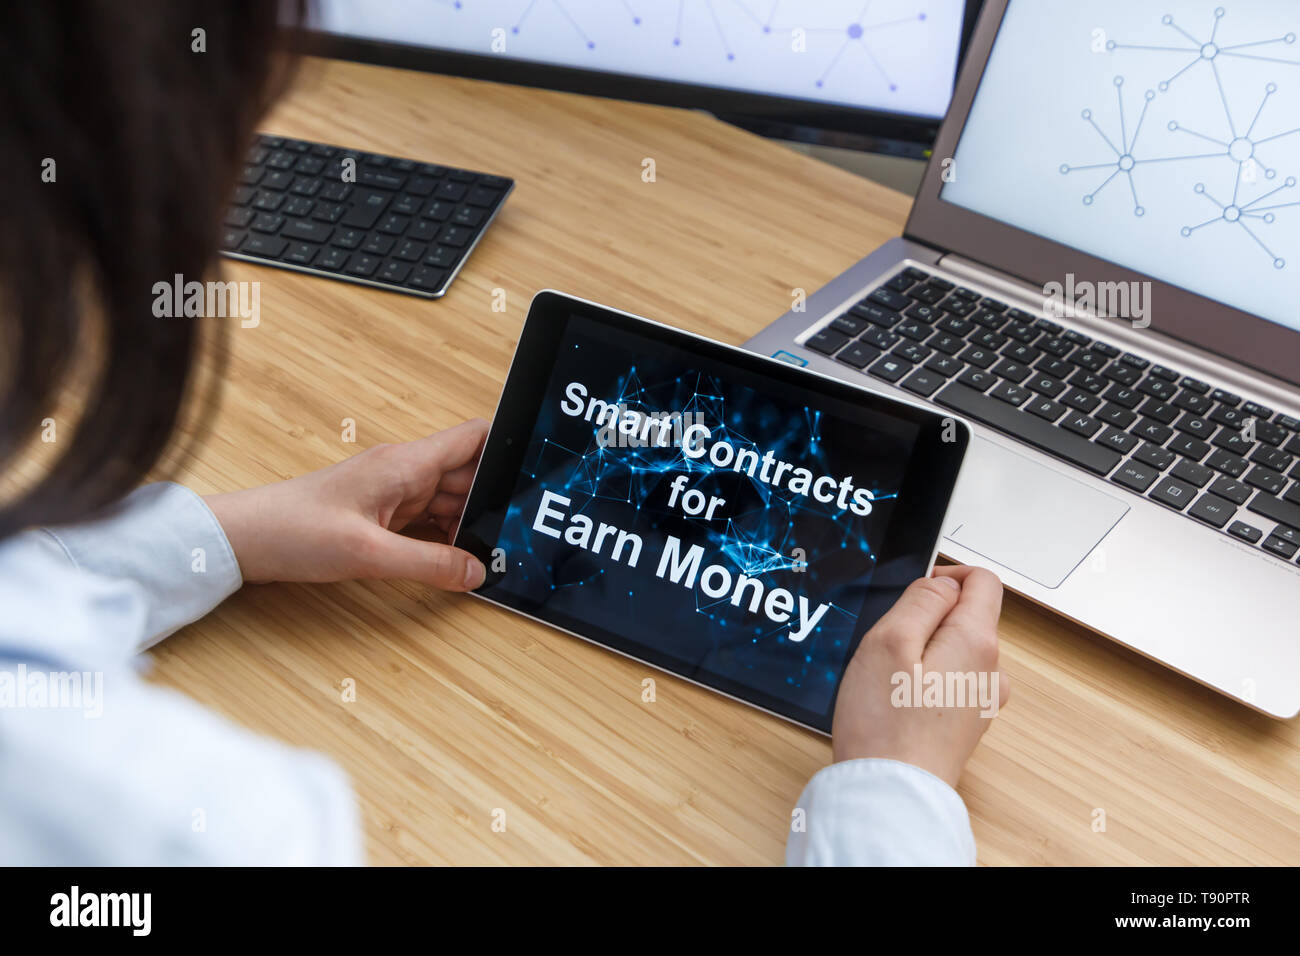 Business Female Using Smart Contracts For Earn Money . Illustration of Ethereum Blockchain on the Screen of Tablet, PC and Laptop. Stock Photo